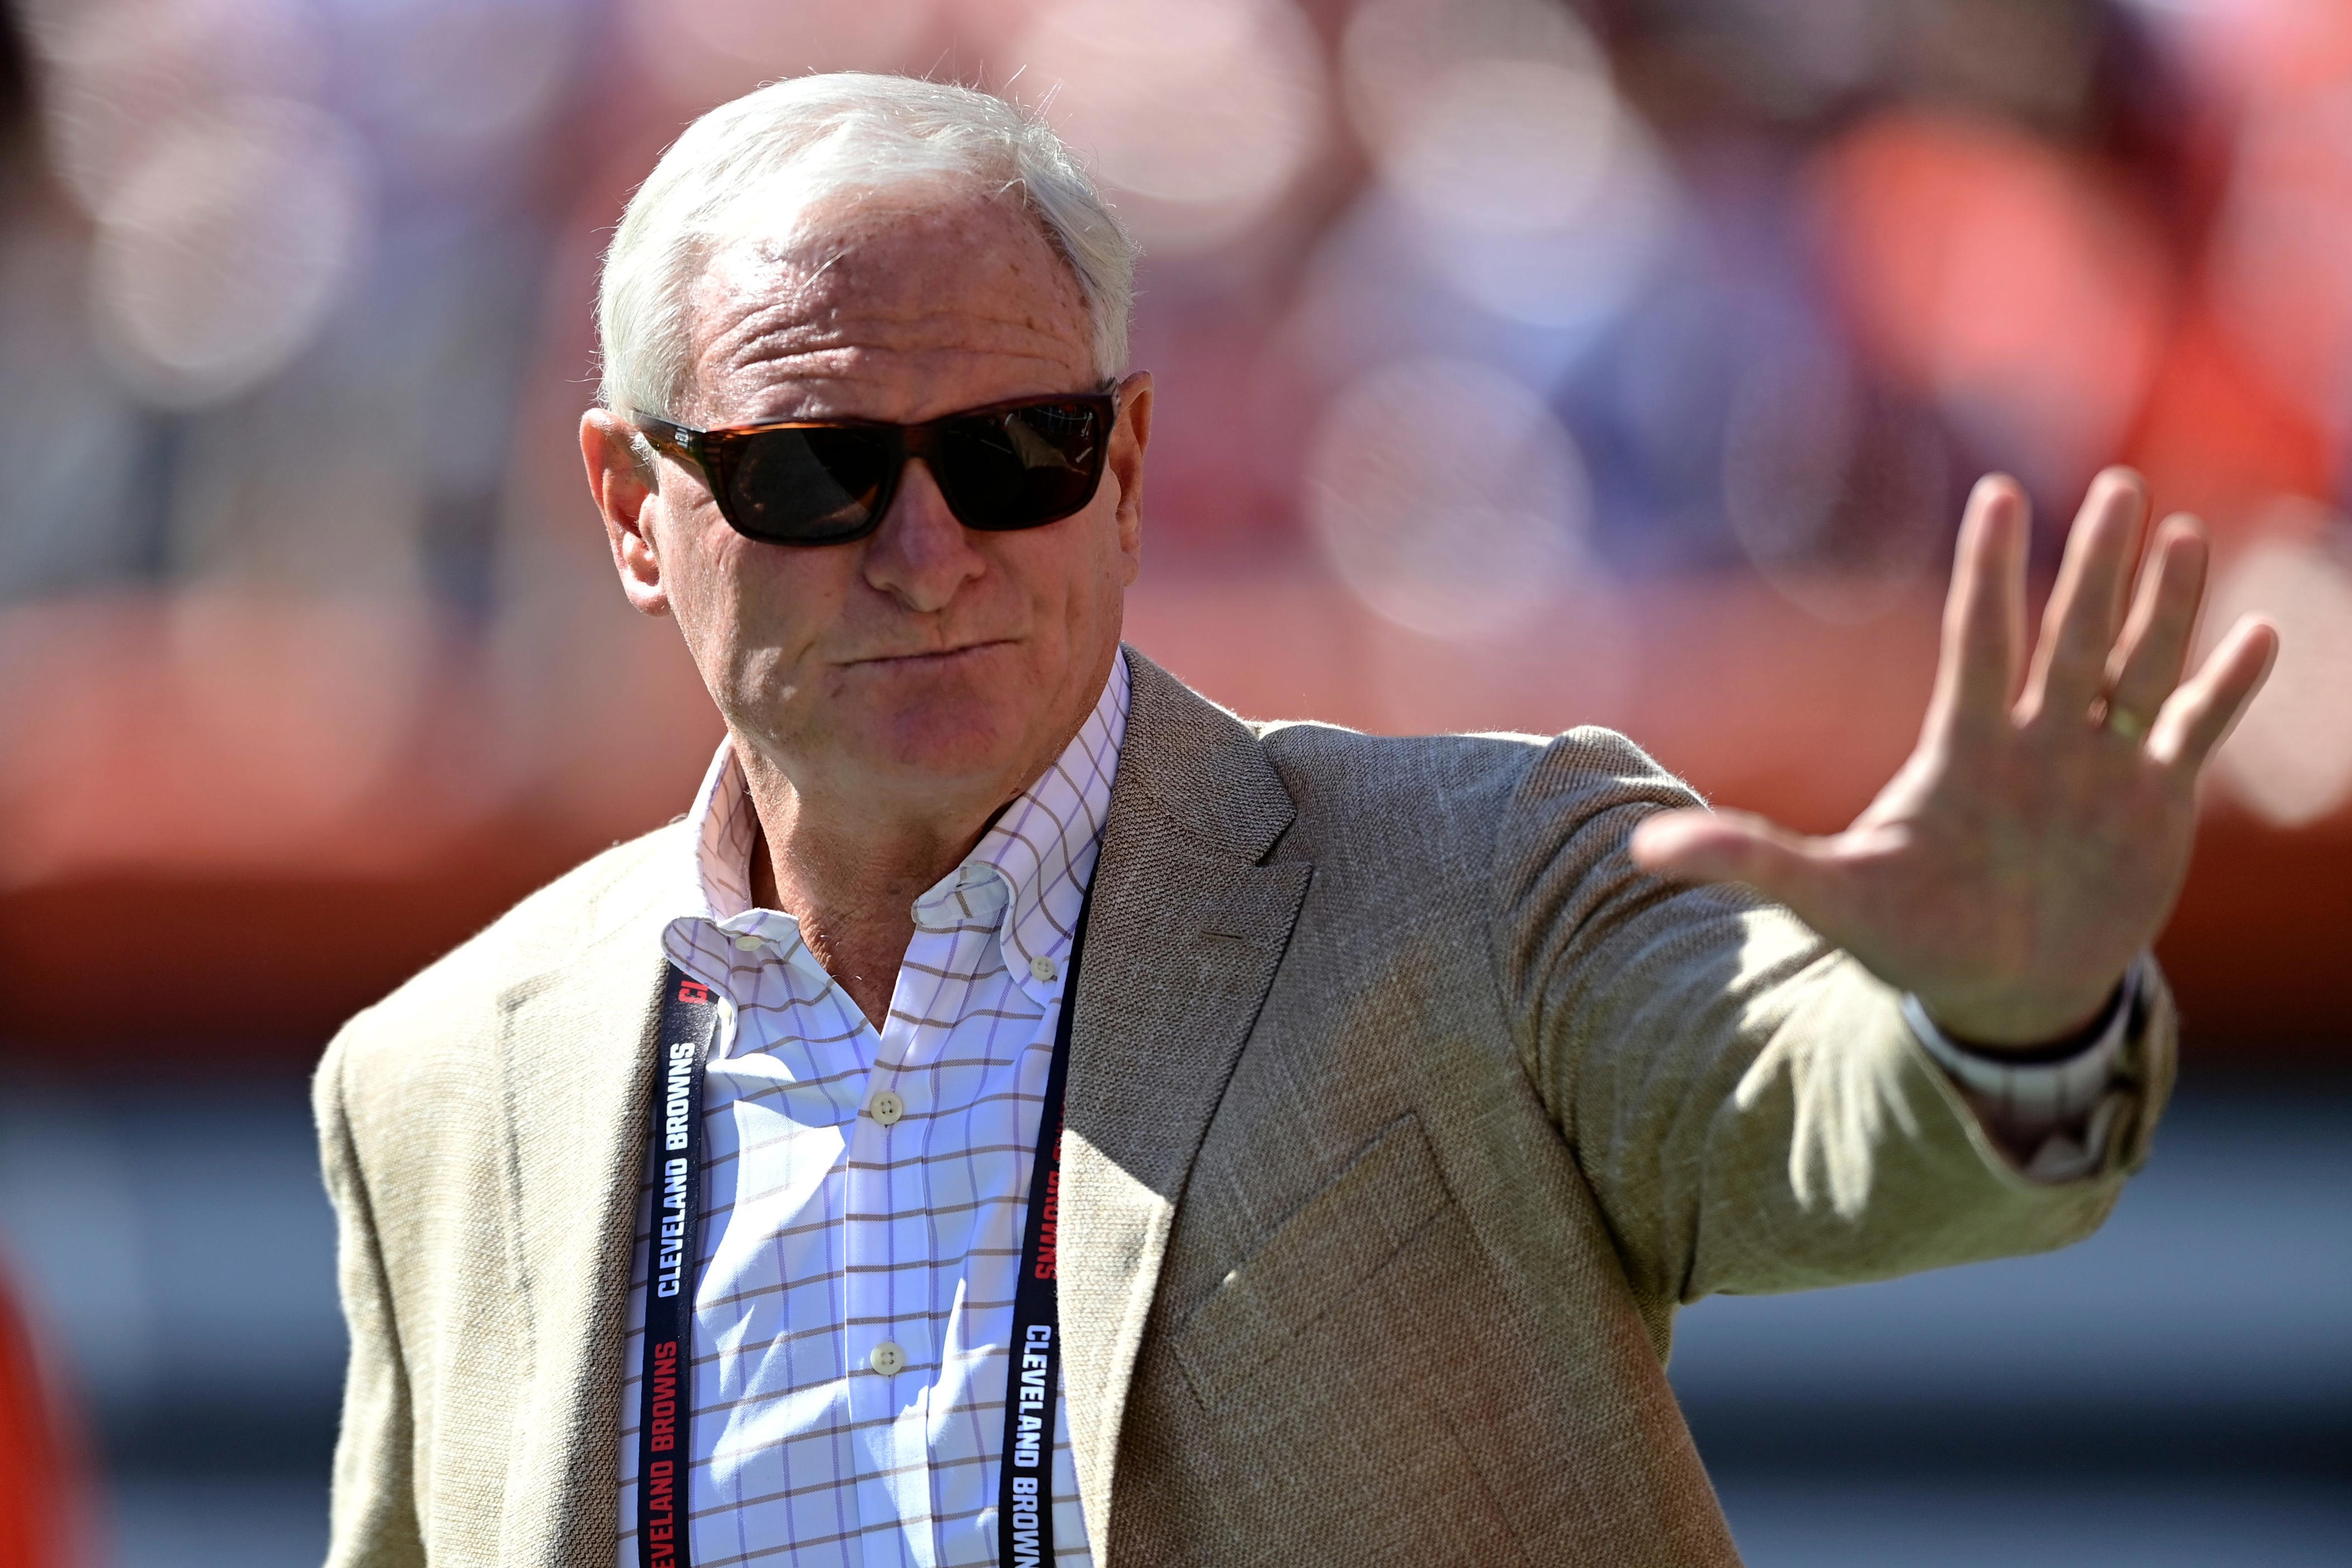 the browns have suggested a pitch for stadium renovations totaling $1.2 billion